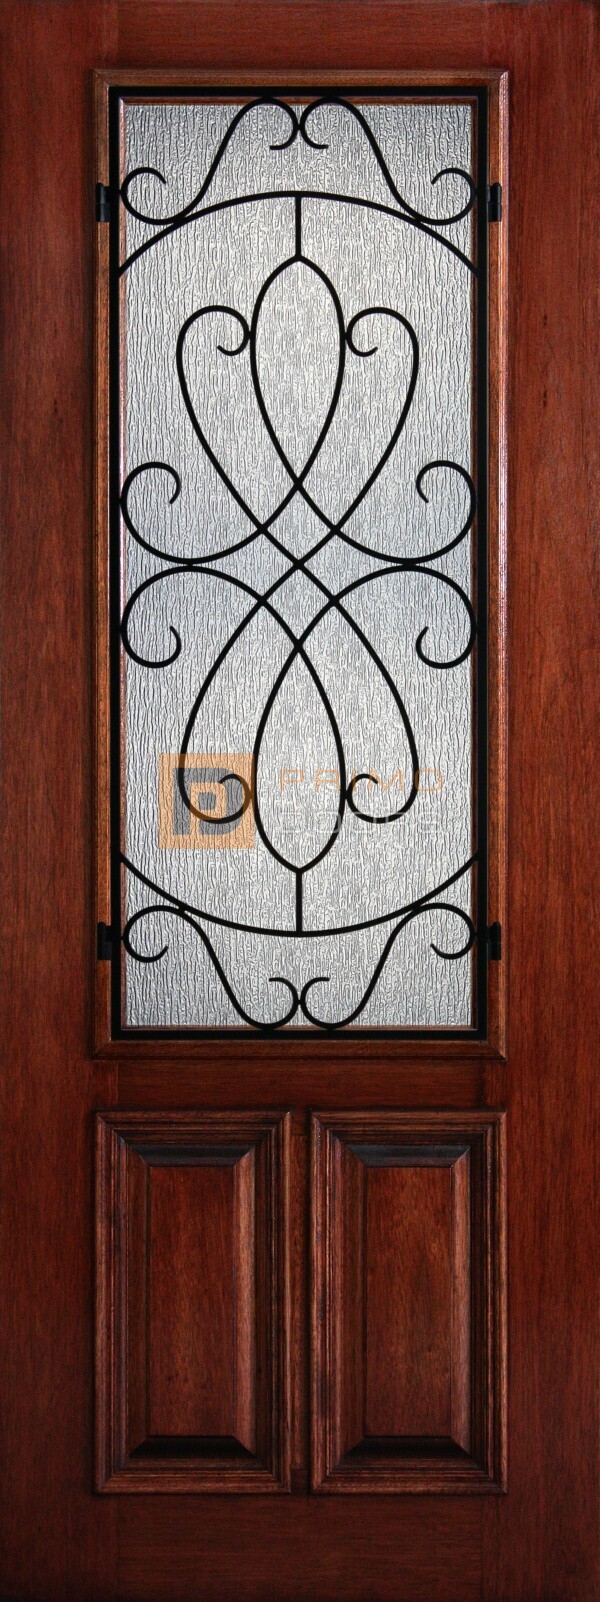 8′ 2/3 Lite Decorative Glass with Iron Grill - Mahogany Single Front Door – PD 3080-23 WHIT